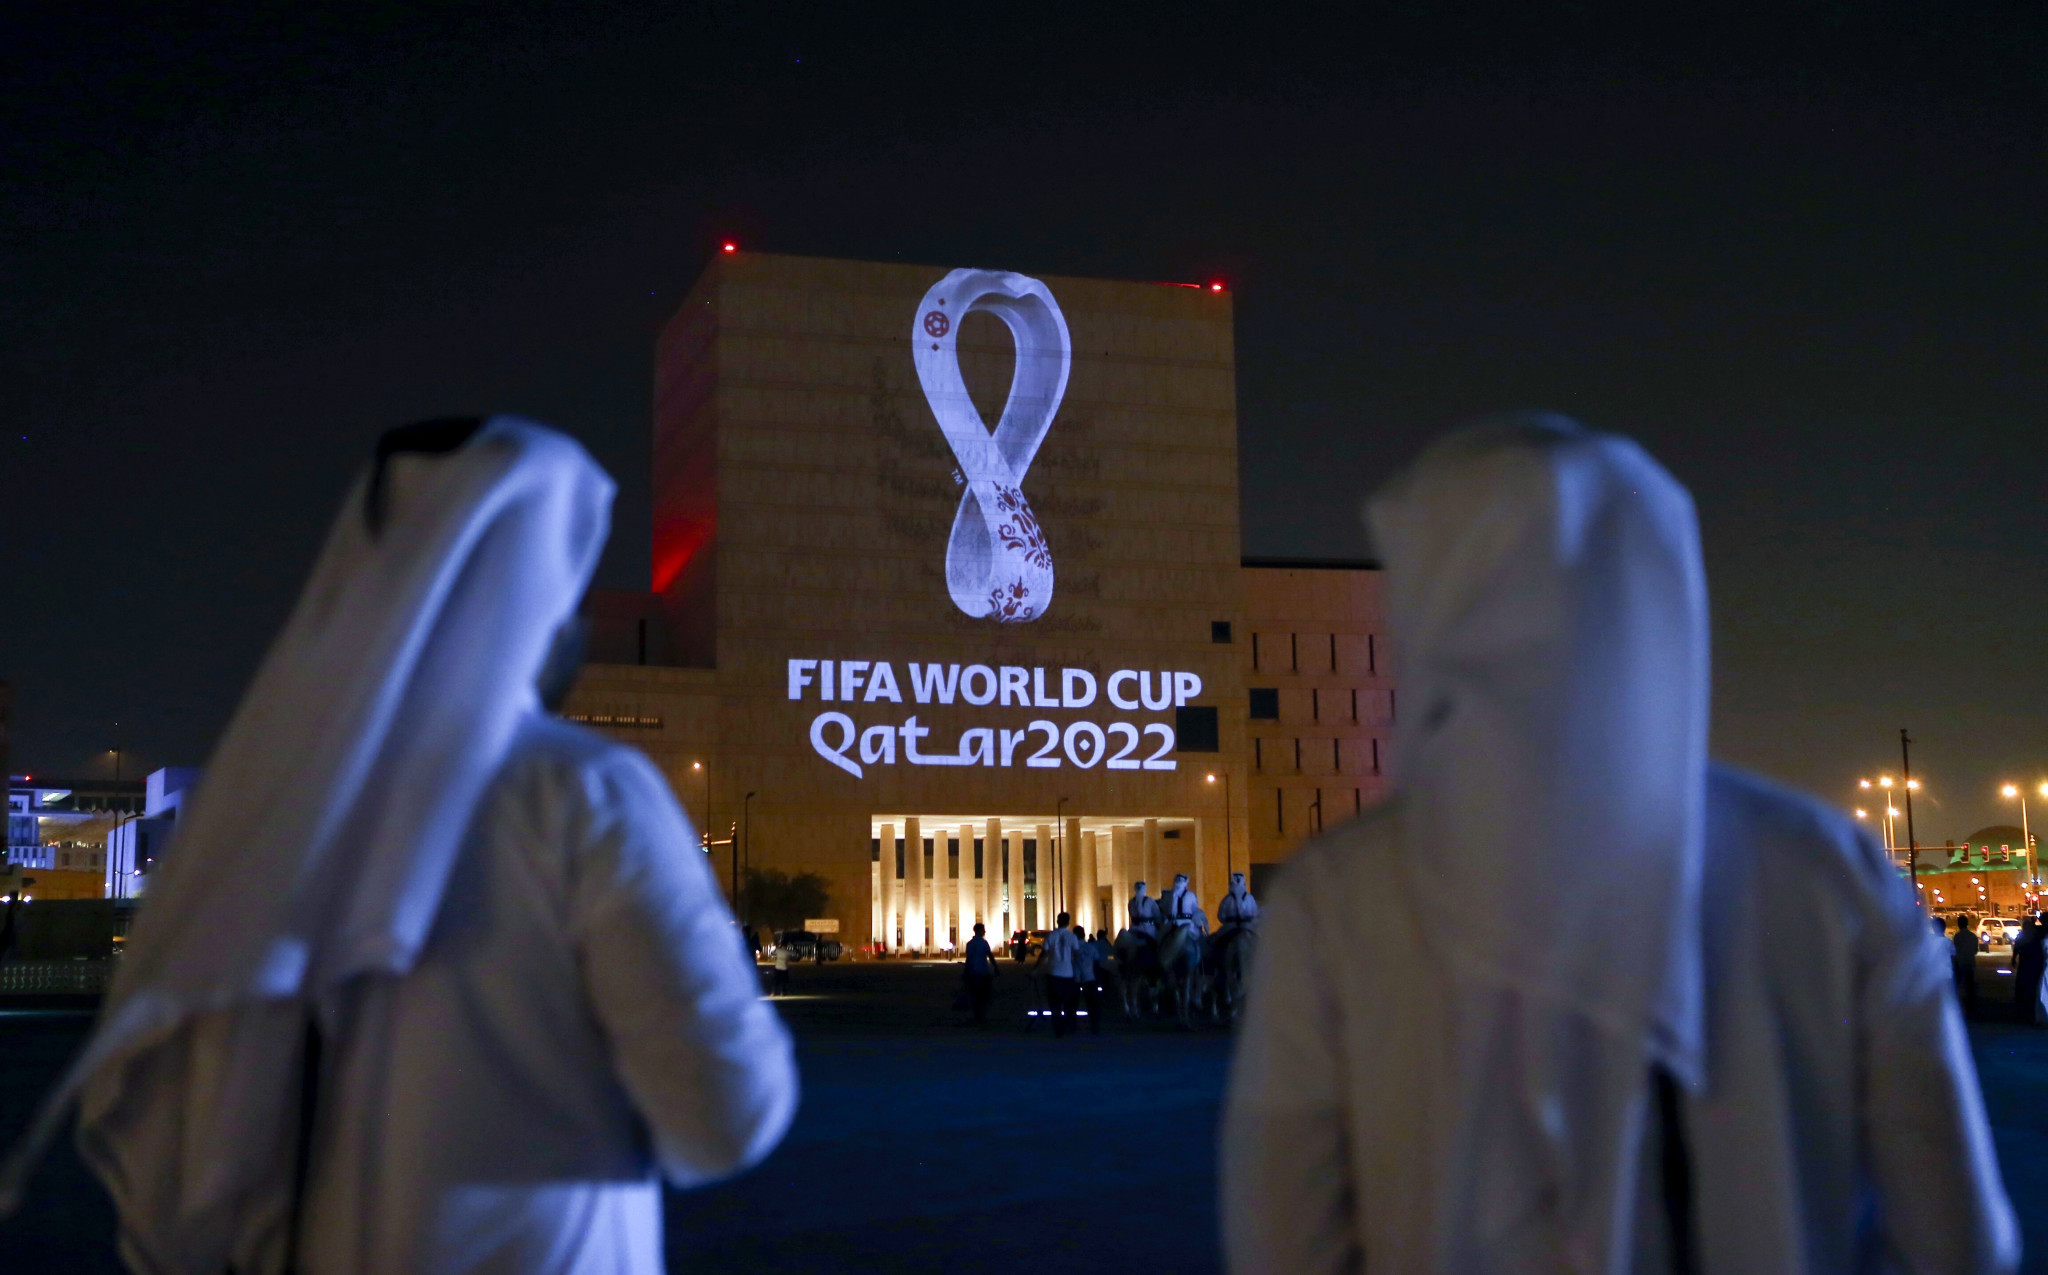 Qatar is a highly conservative nation, but could be lenient on some offences by fans during the FIFA World Cup ©Getty Images